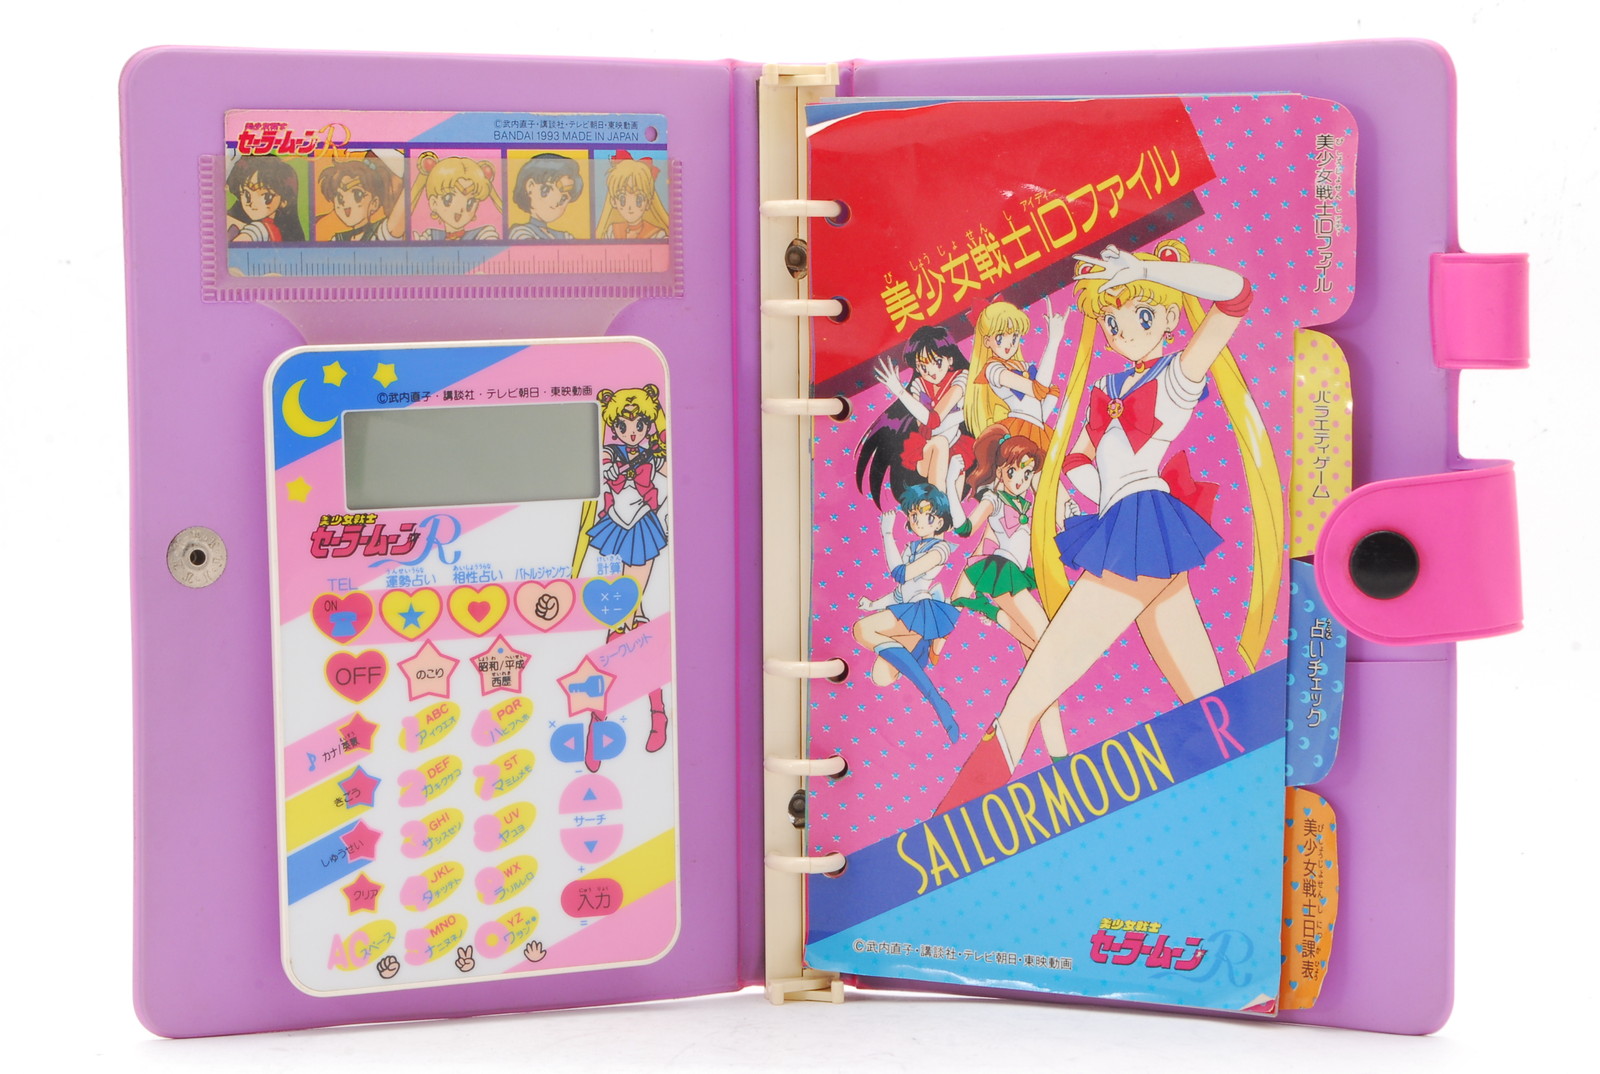 PROMOTION. RARE MINT BANDAI Sailor Moon R System Notebook Calculator WORKS Made in 1993 from Japan